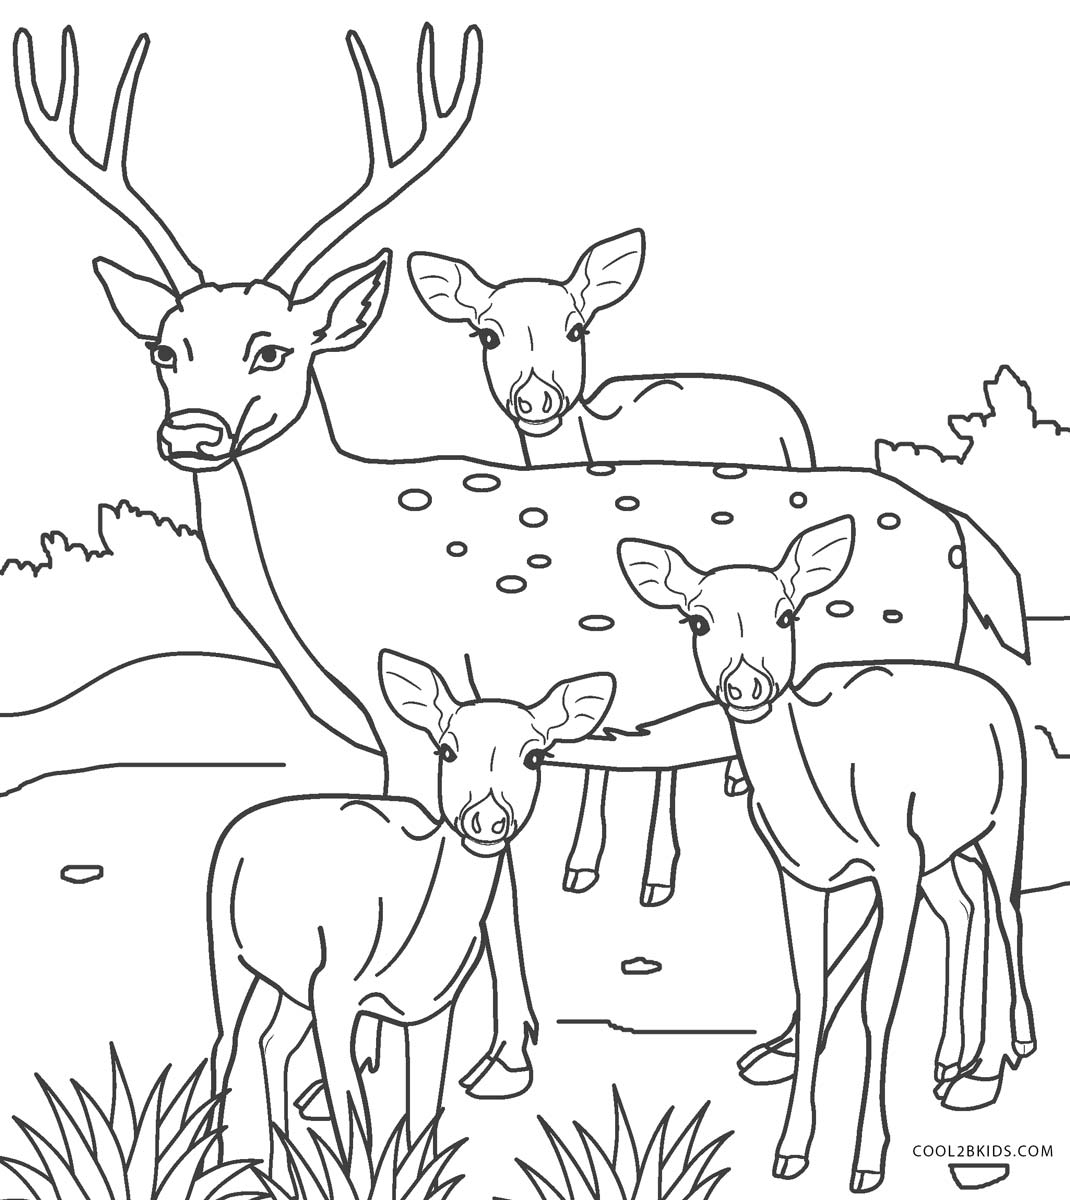 free-printable-deer-coloring-pages-for-kids-cool2bkids